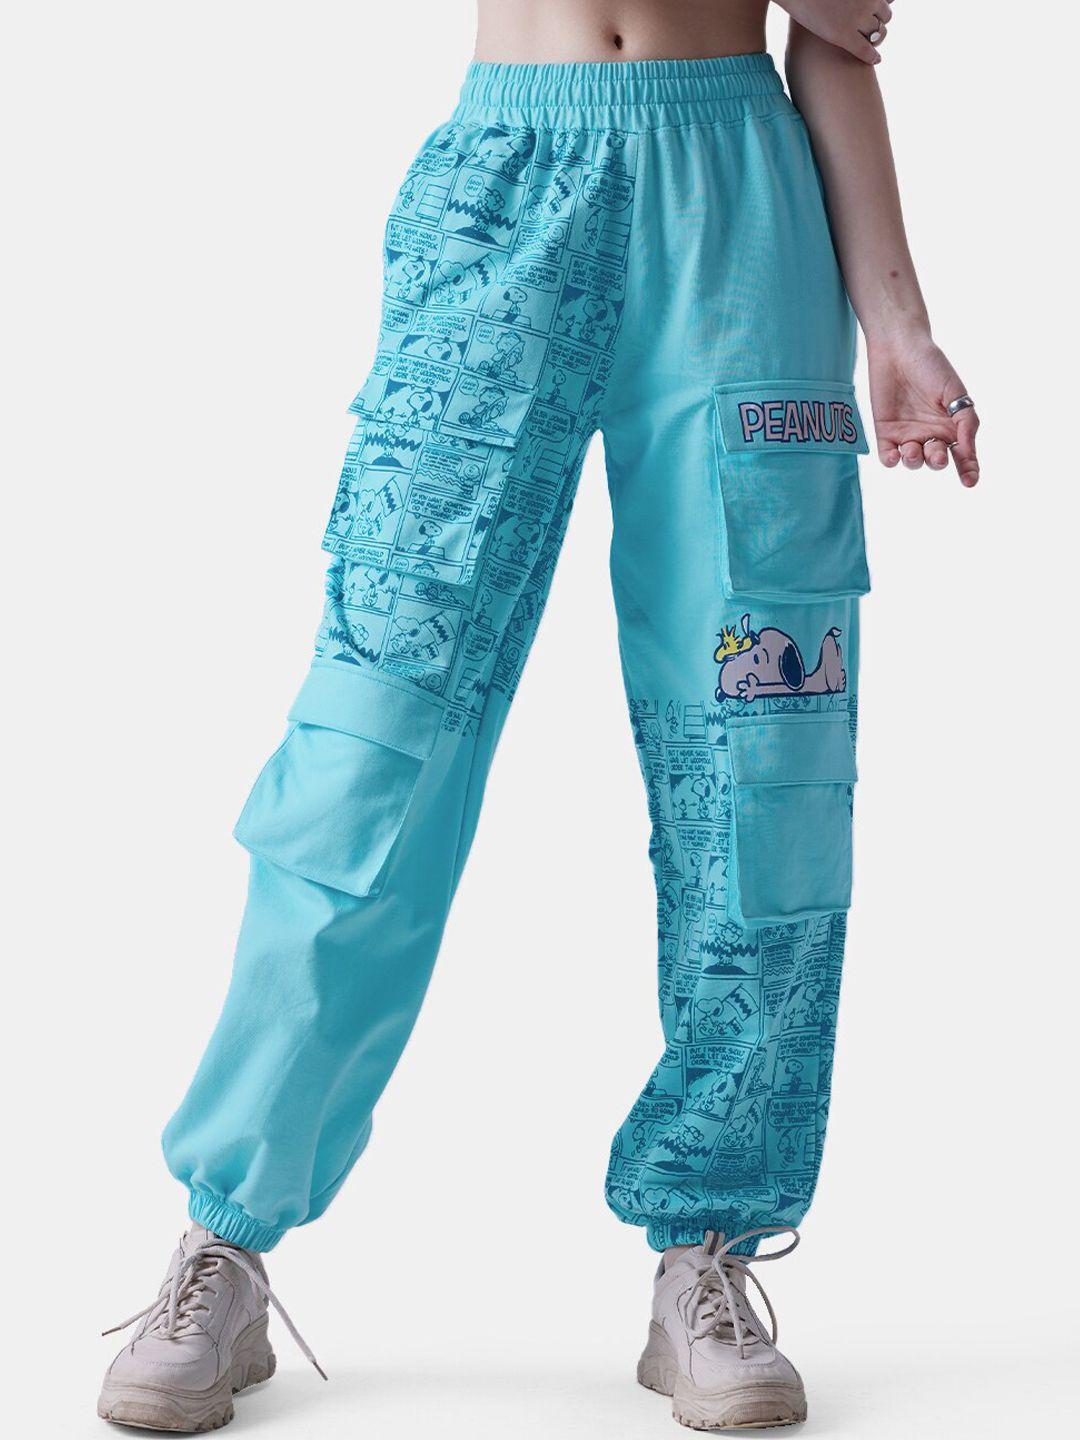 the souled store women blue & black peanuts printed relaxed fit cotton joggers